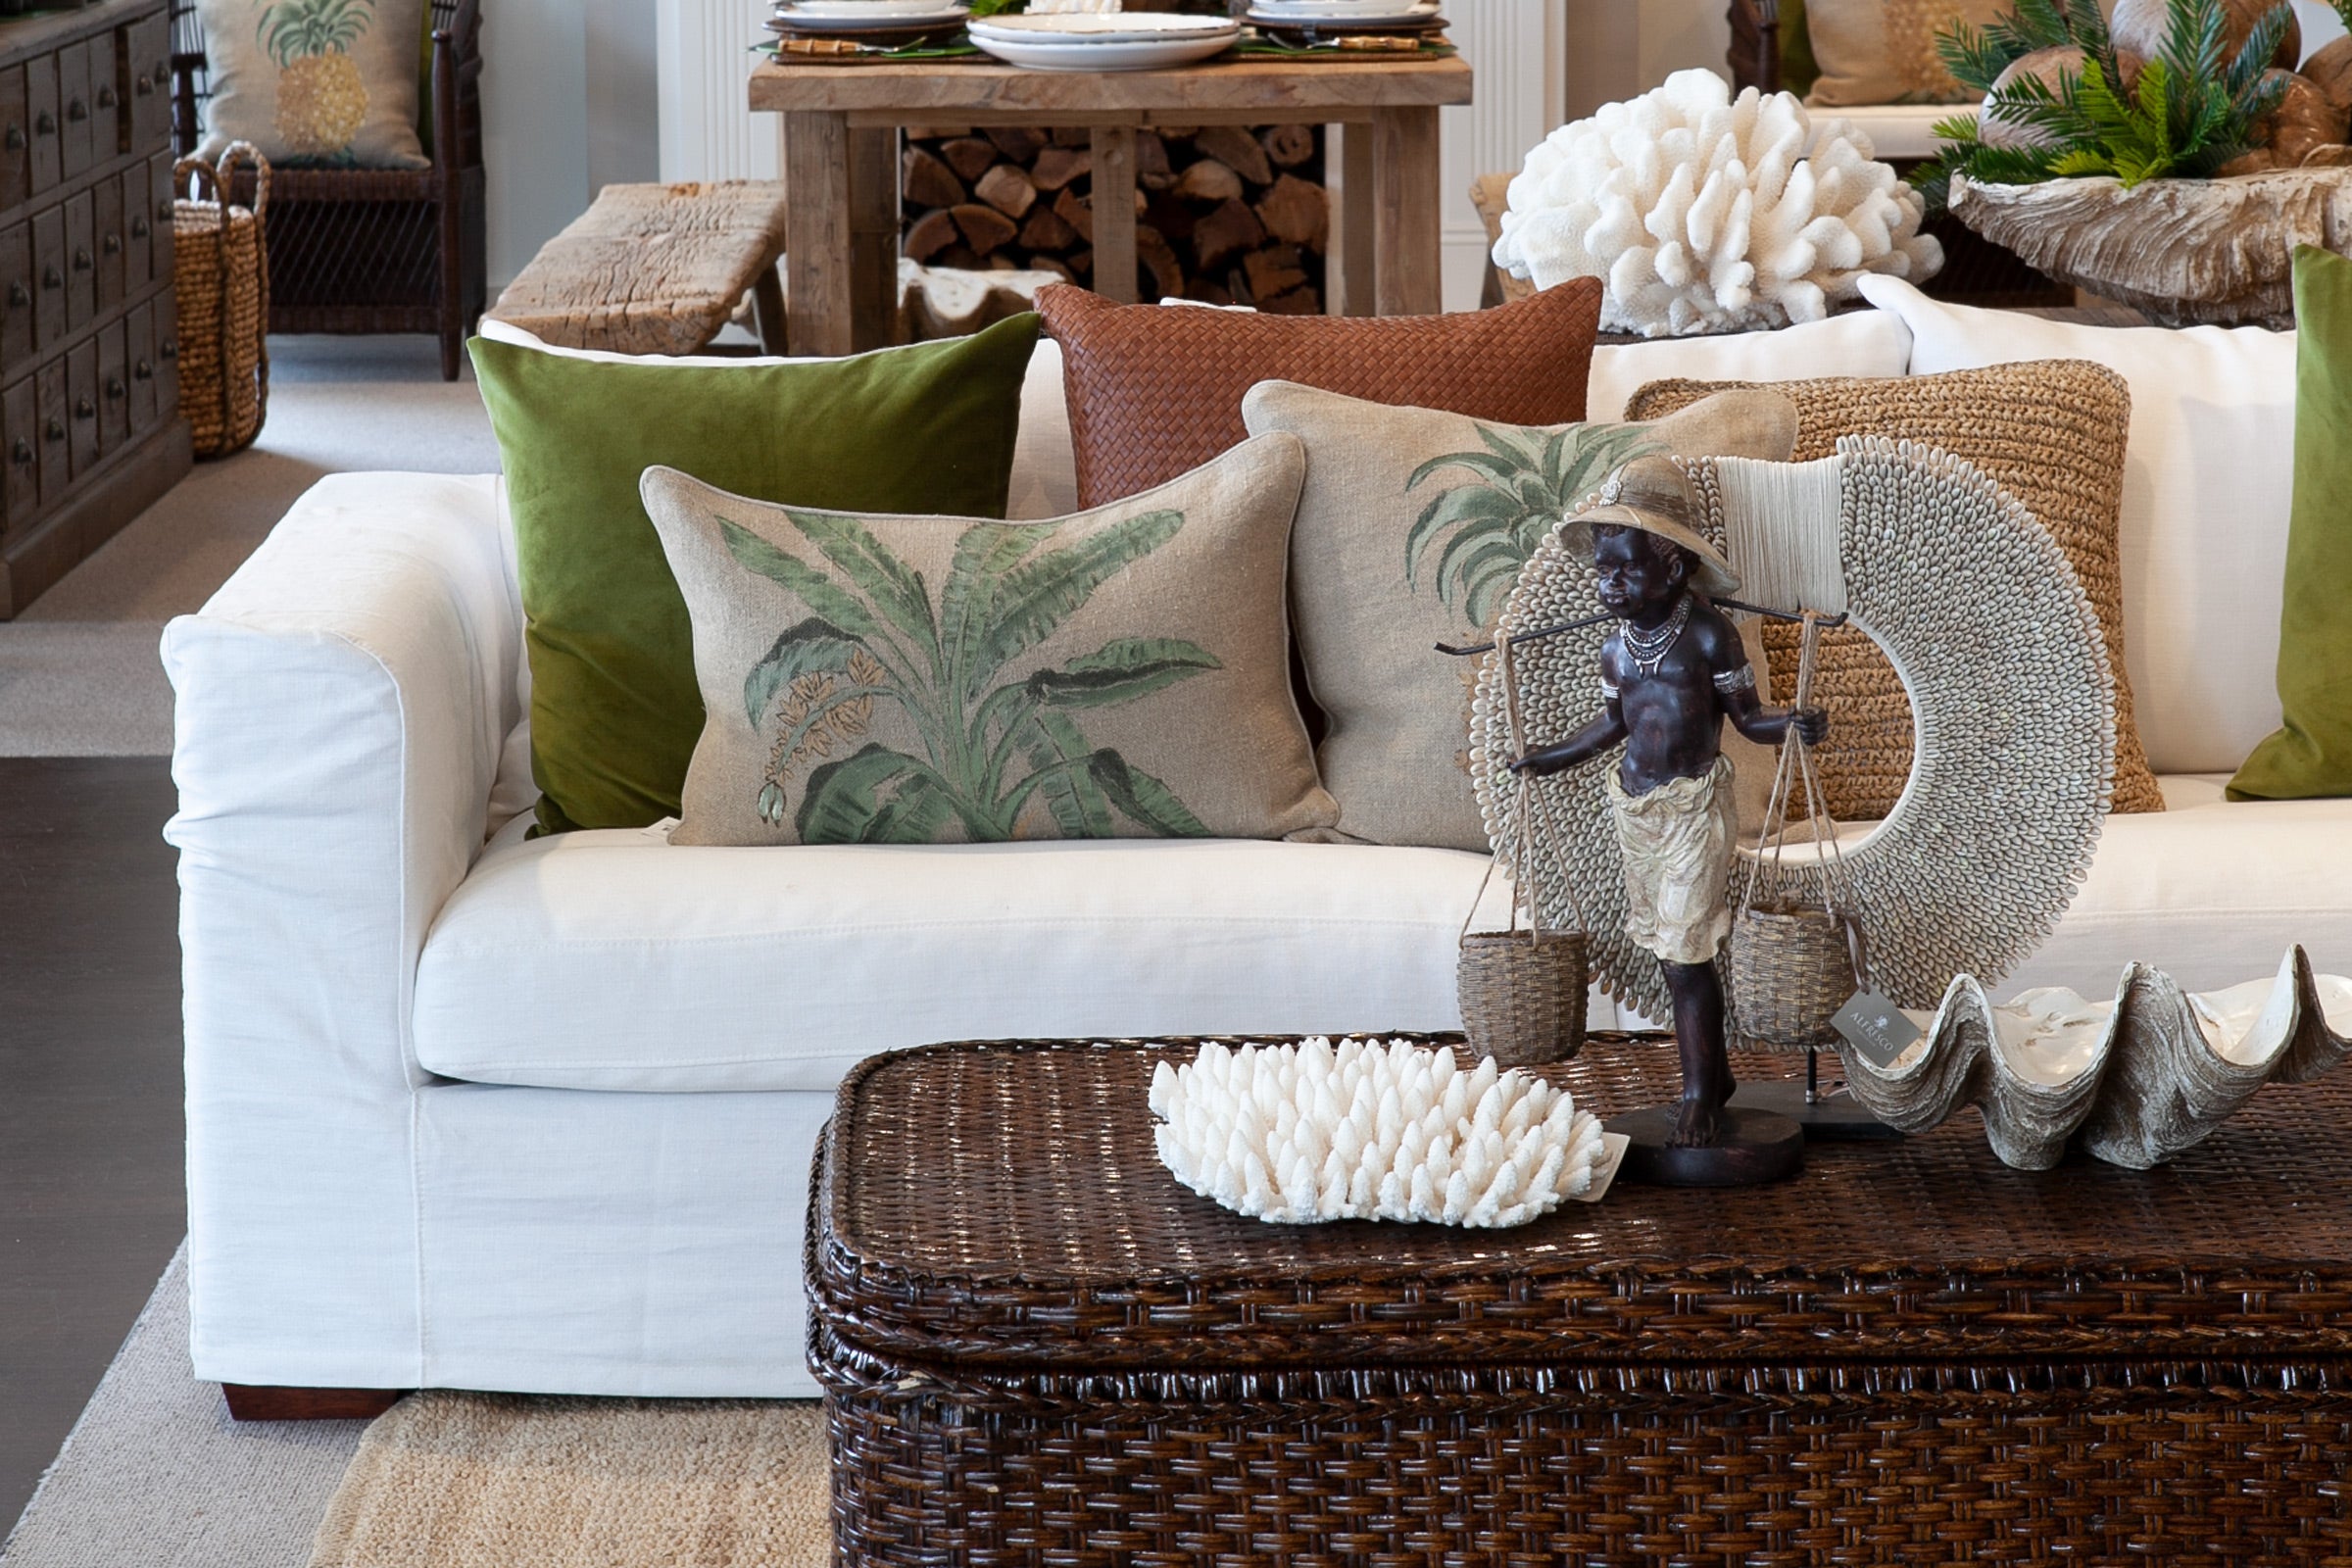 How To Create A Tropical Paradise At Home